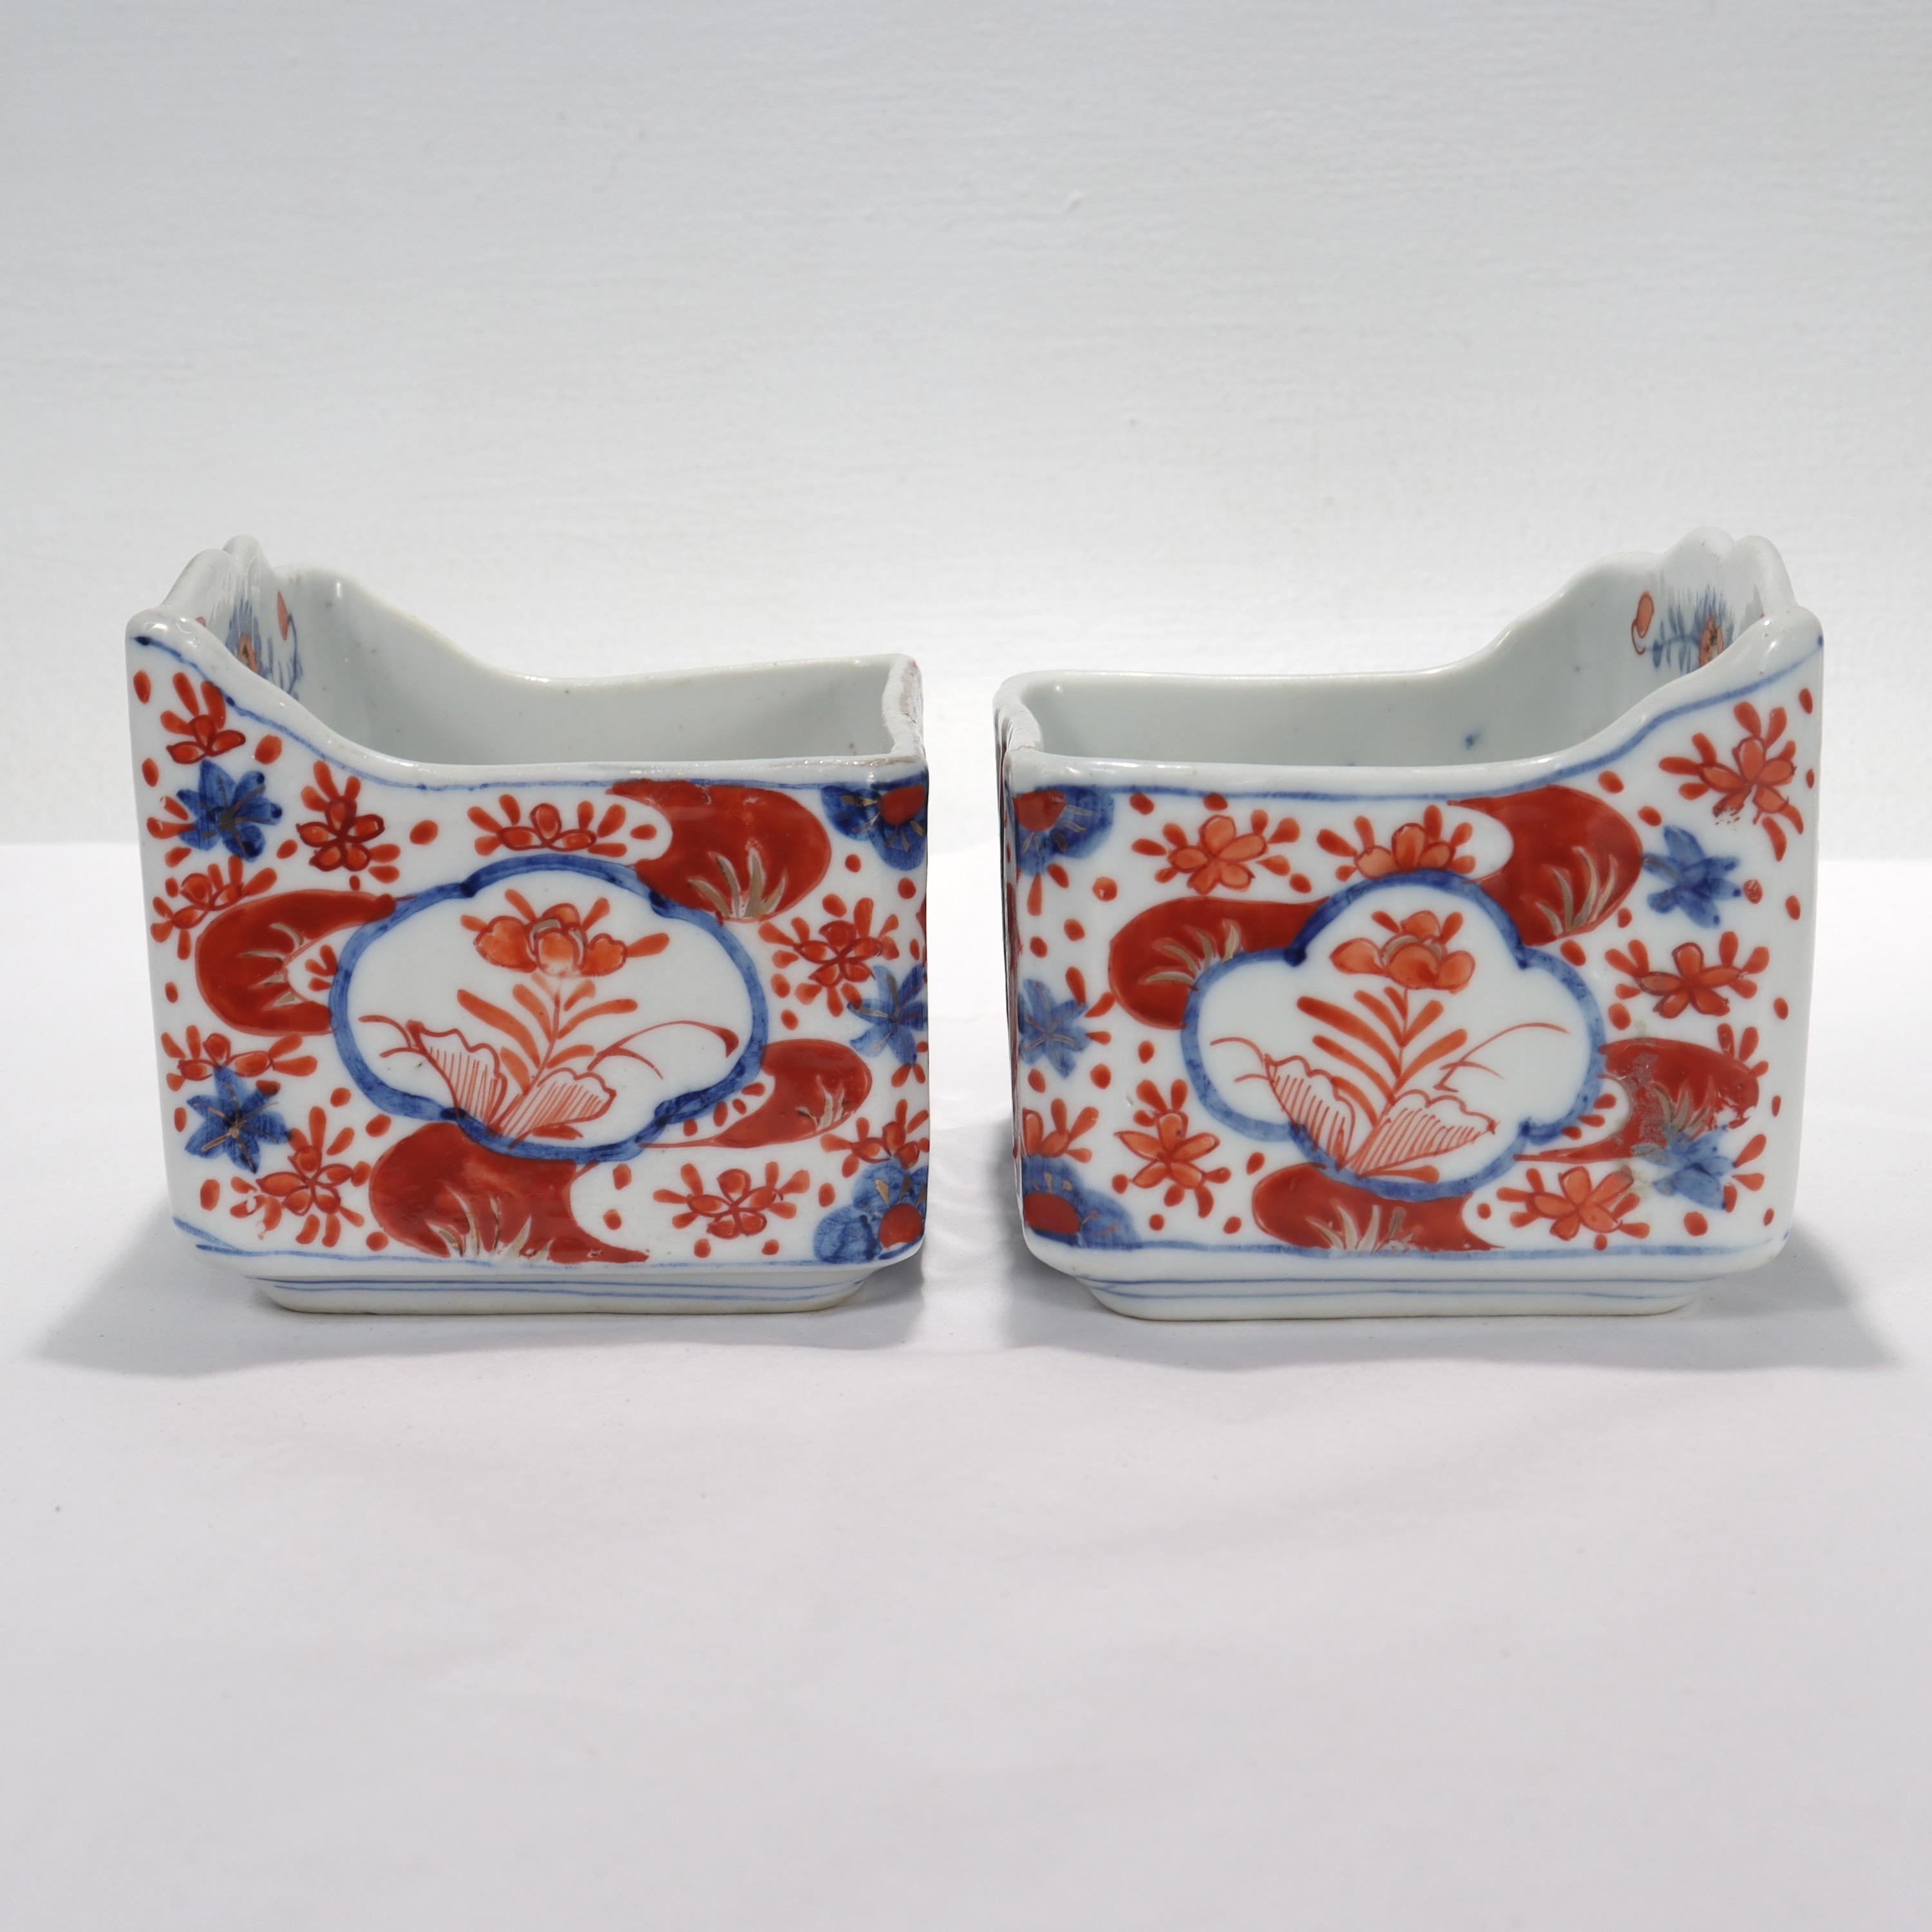 Pair of Old or Antique Japanese Imari Porcelain Soap Dishes For Sale 2